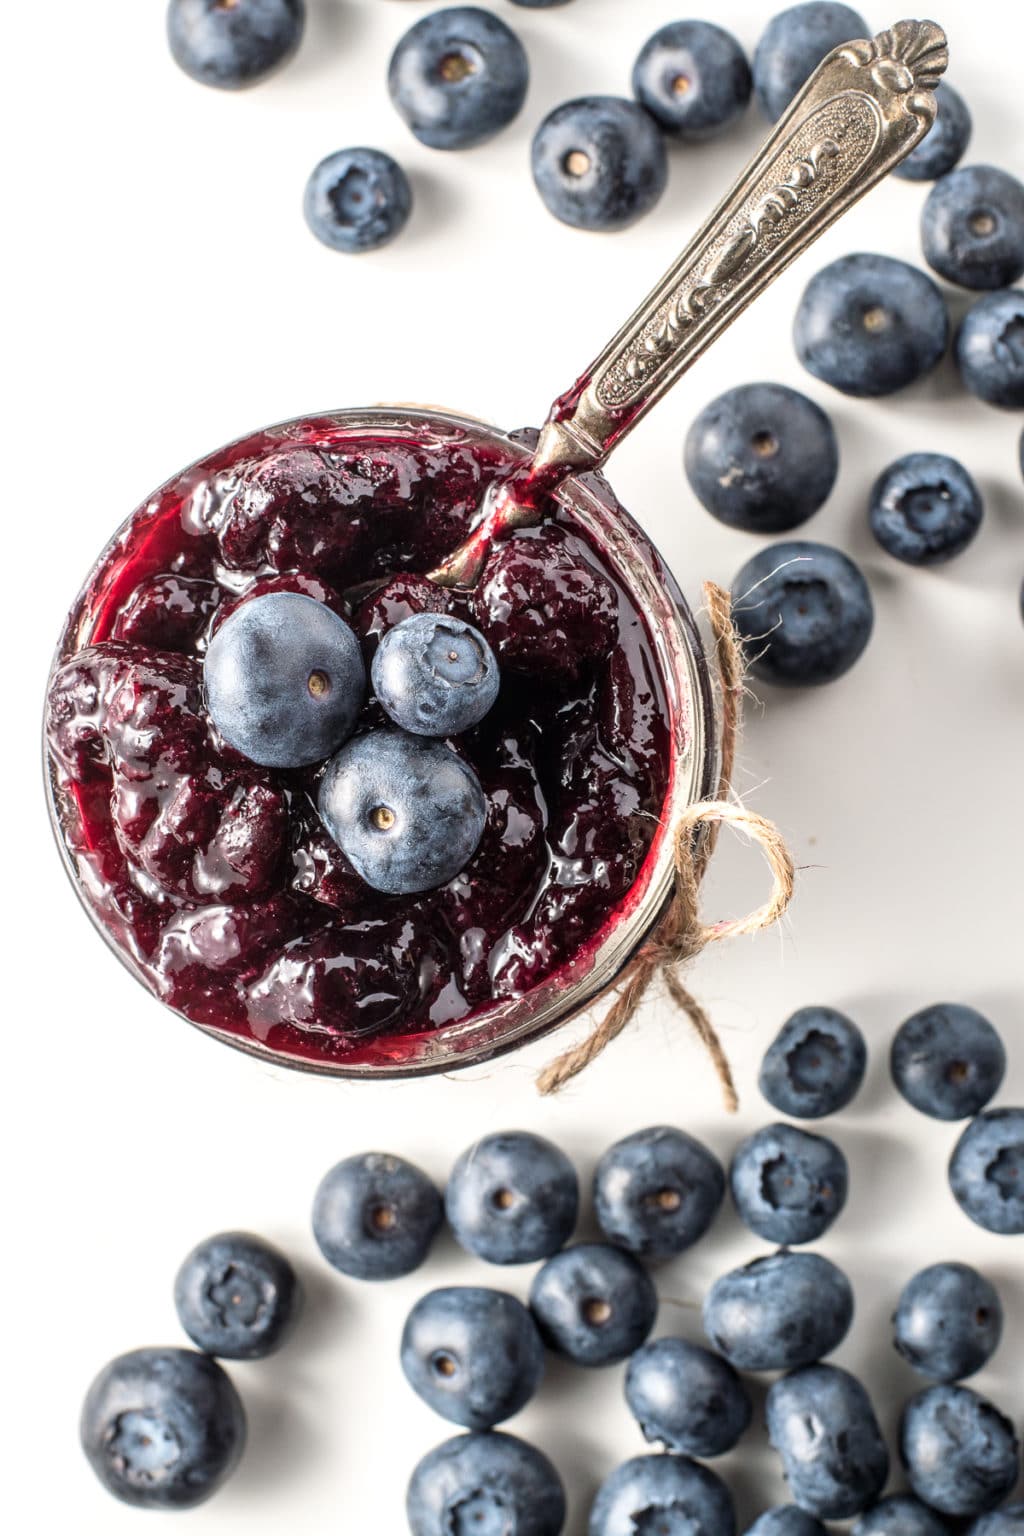 Top down view of an open jar of blueberry jam with scattered blueberries on a white background